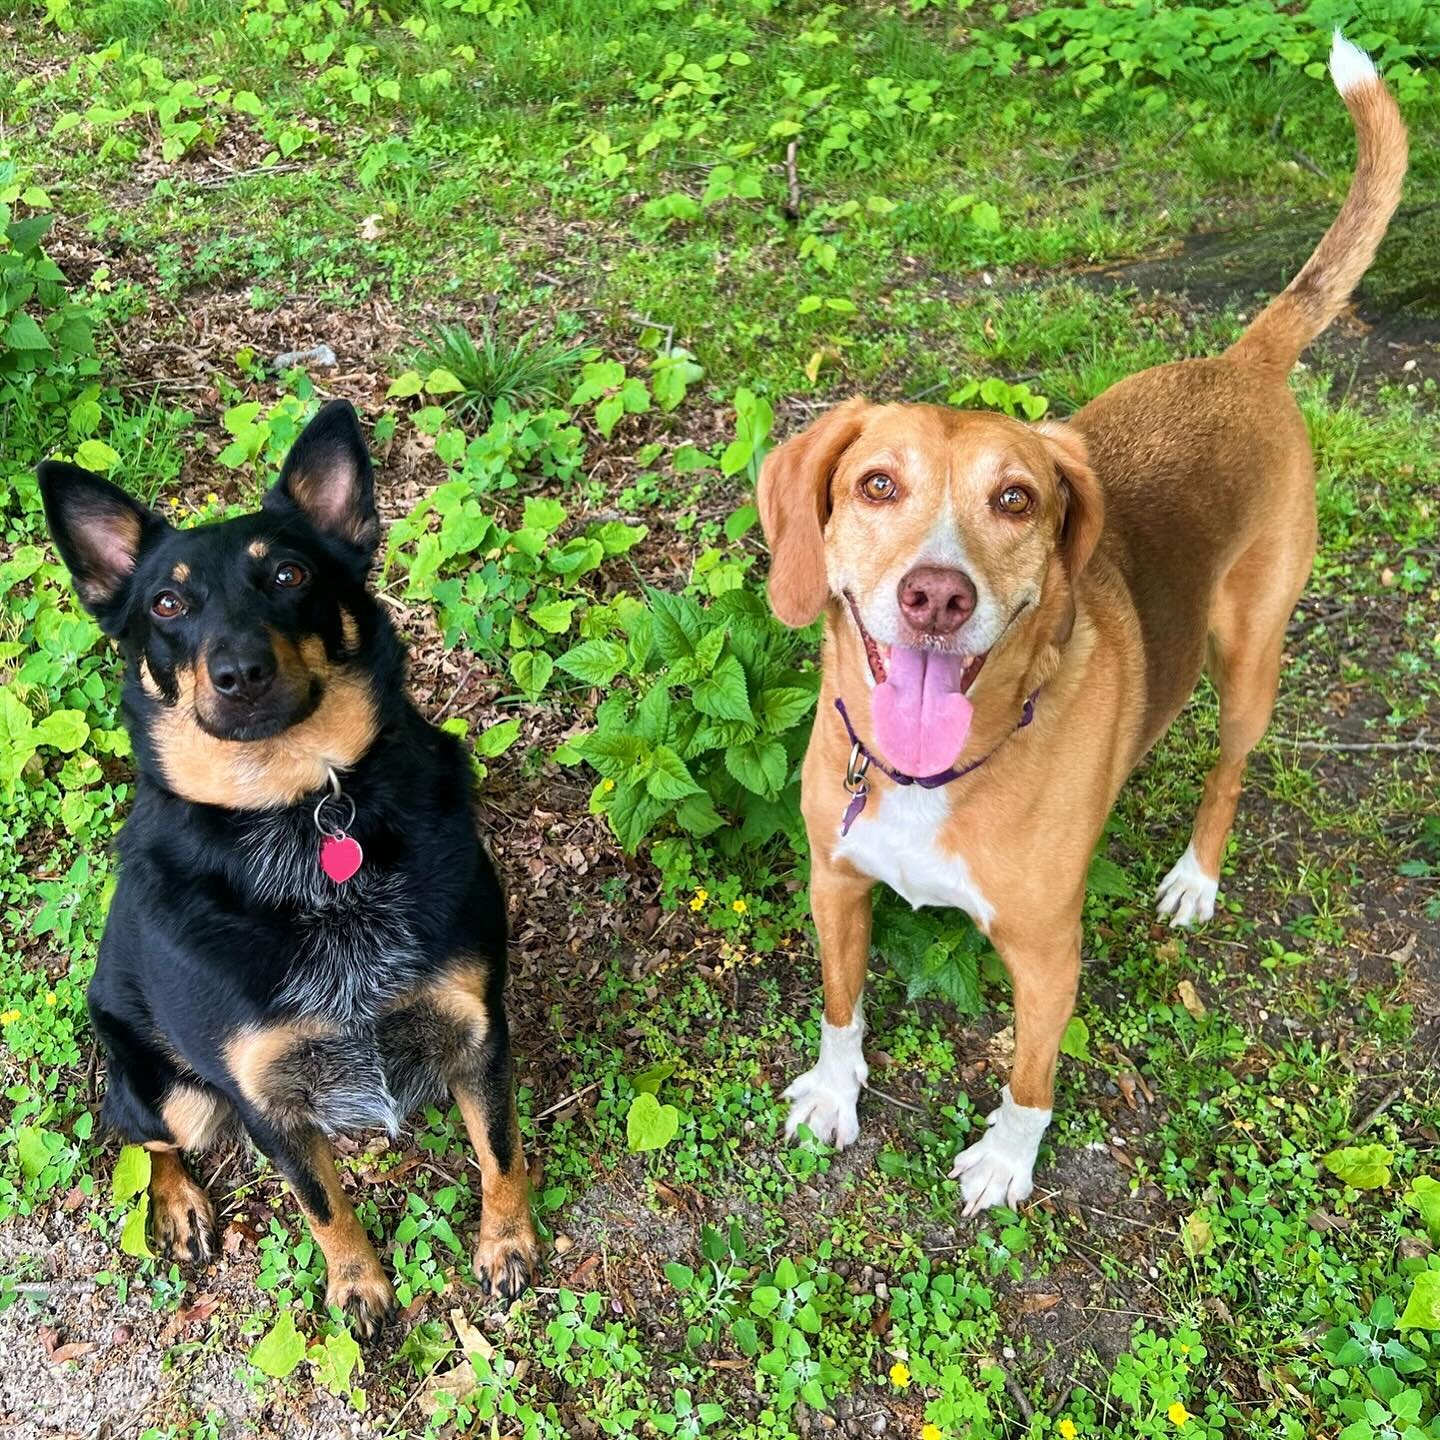 I had so much fun taking care of these three cuties the past couple days! Stella the hound mix, Blueberry the cattle dog mix and Chuckie the black cat! 🐶🐱💕